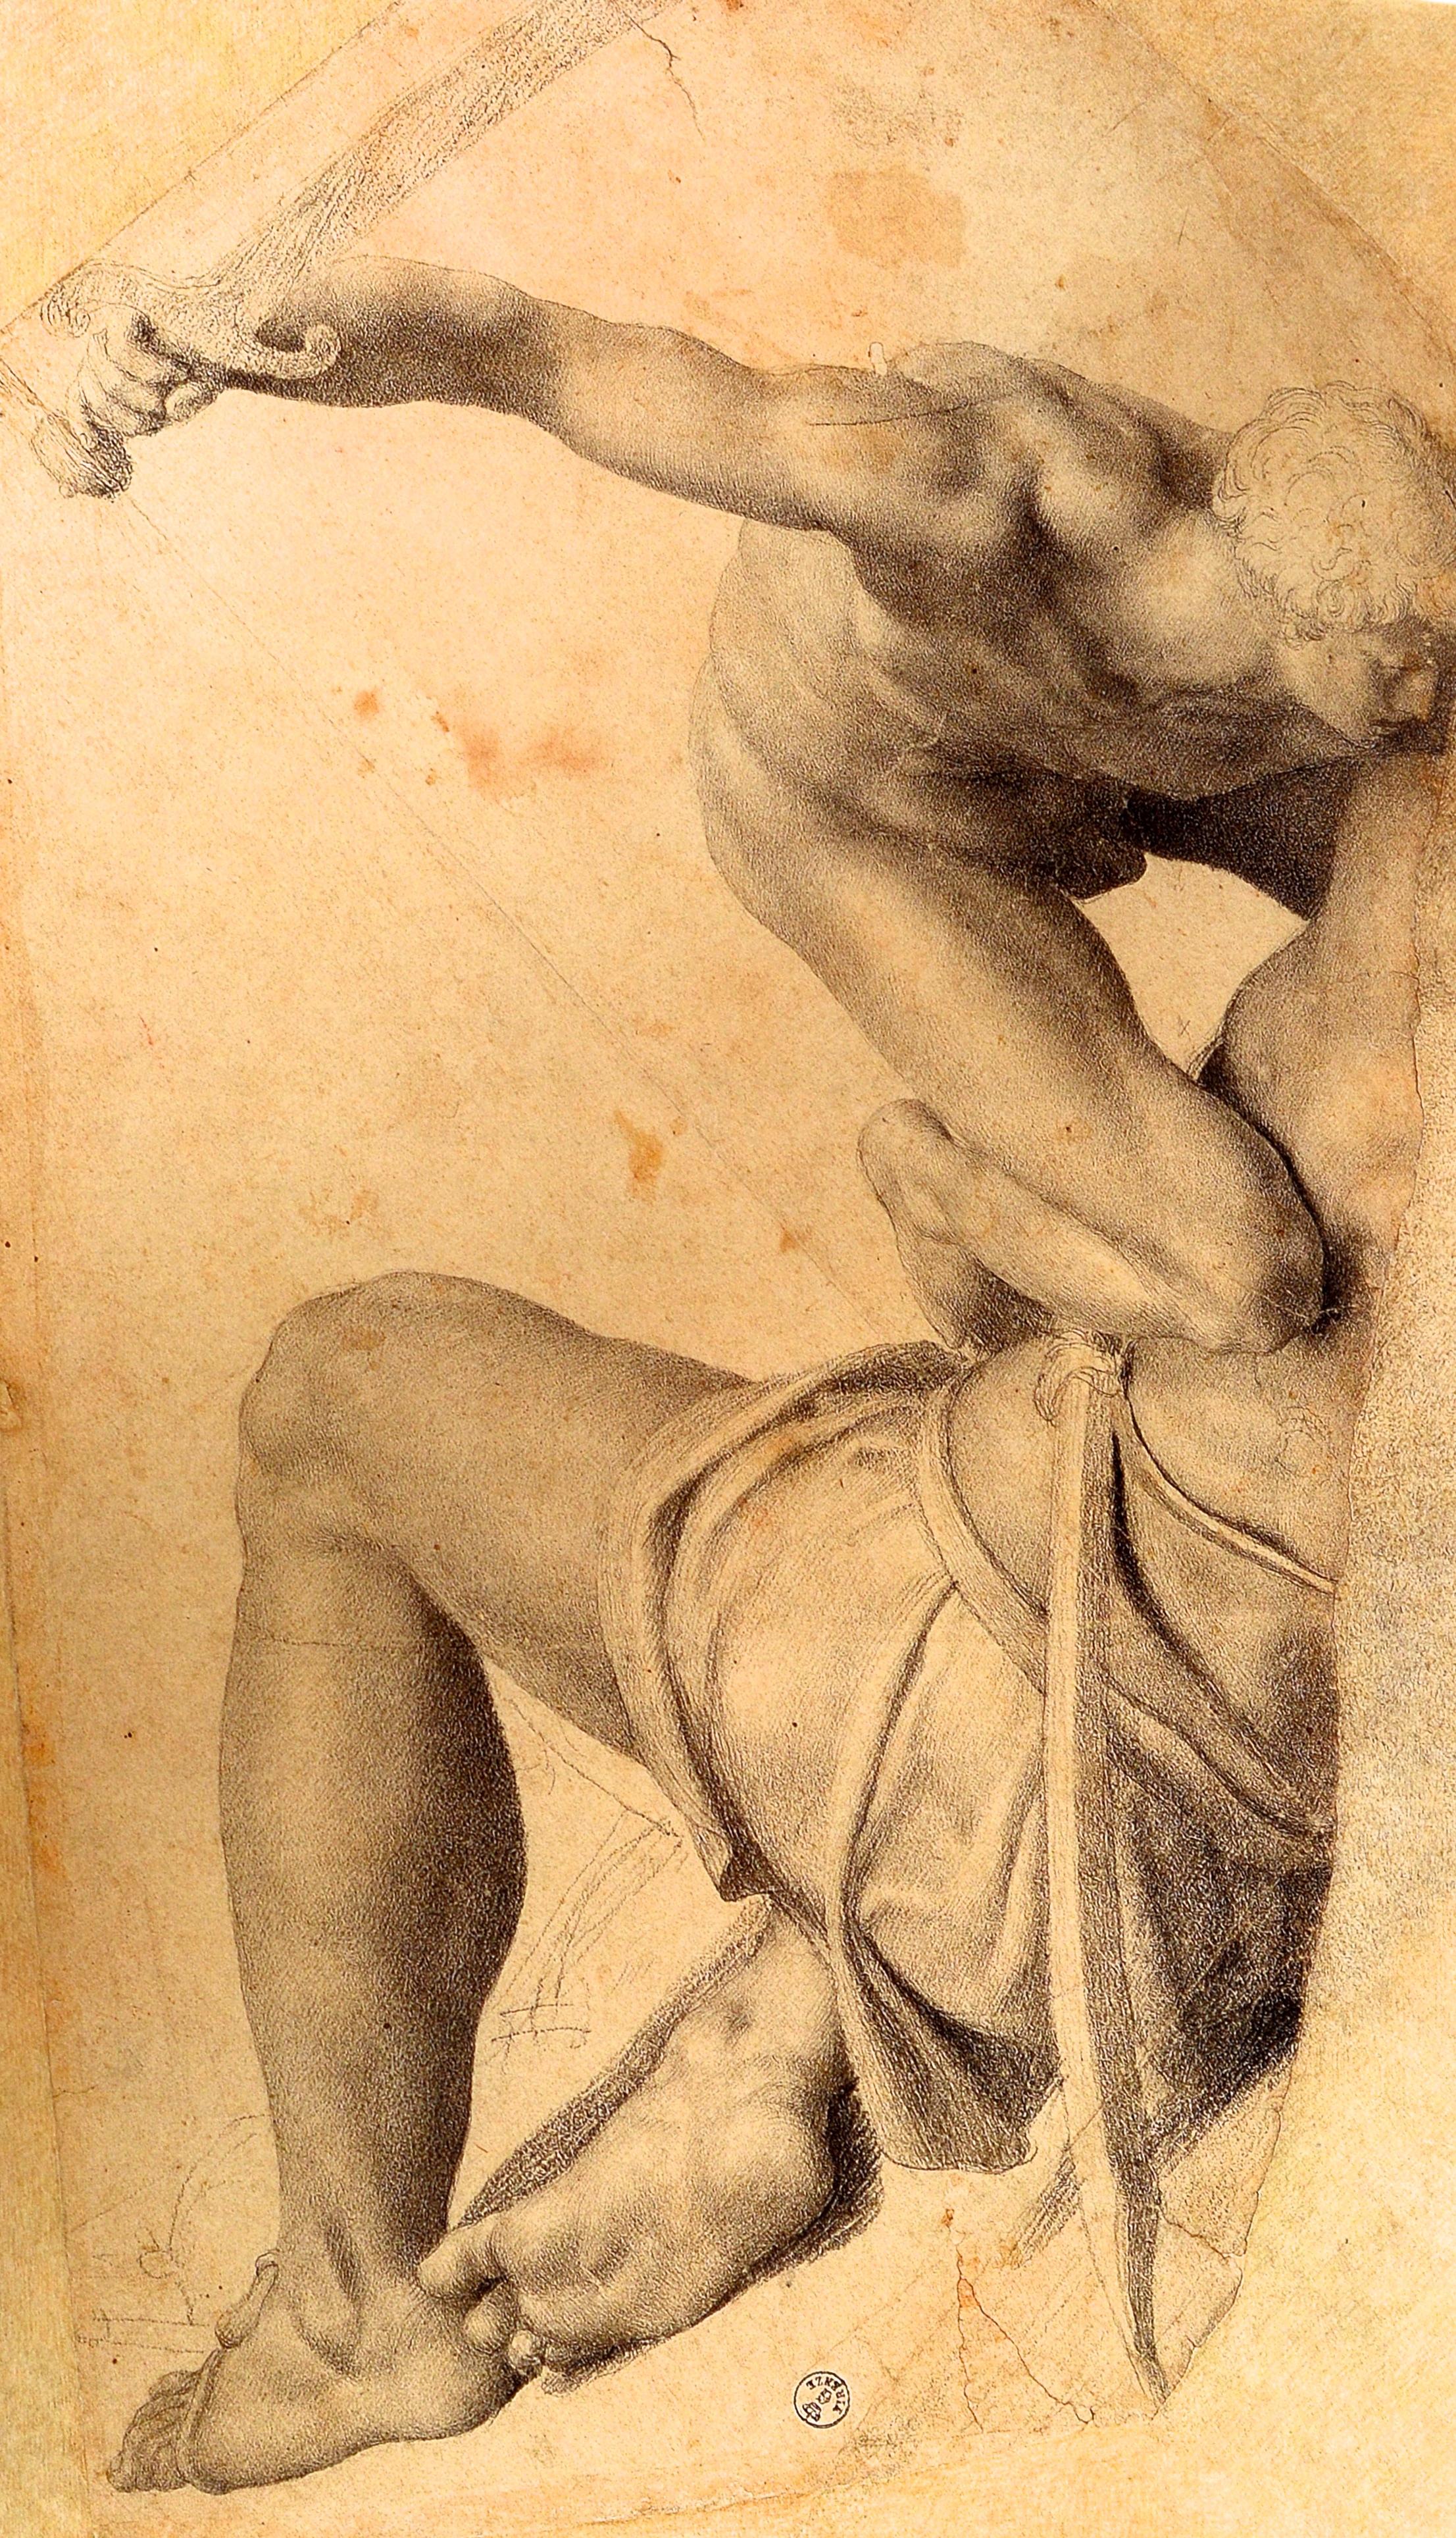 Contemporary Michelangelo. The Drawings of a Genius, 1st Ed Exhibition Catalog For Sale